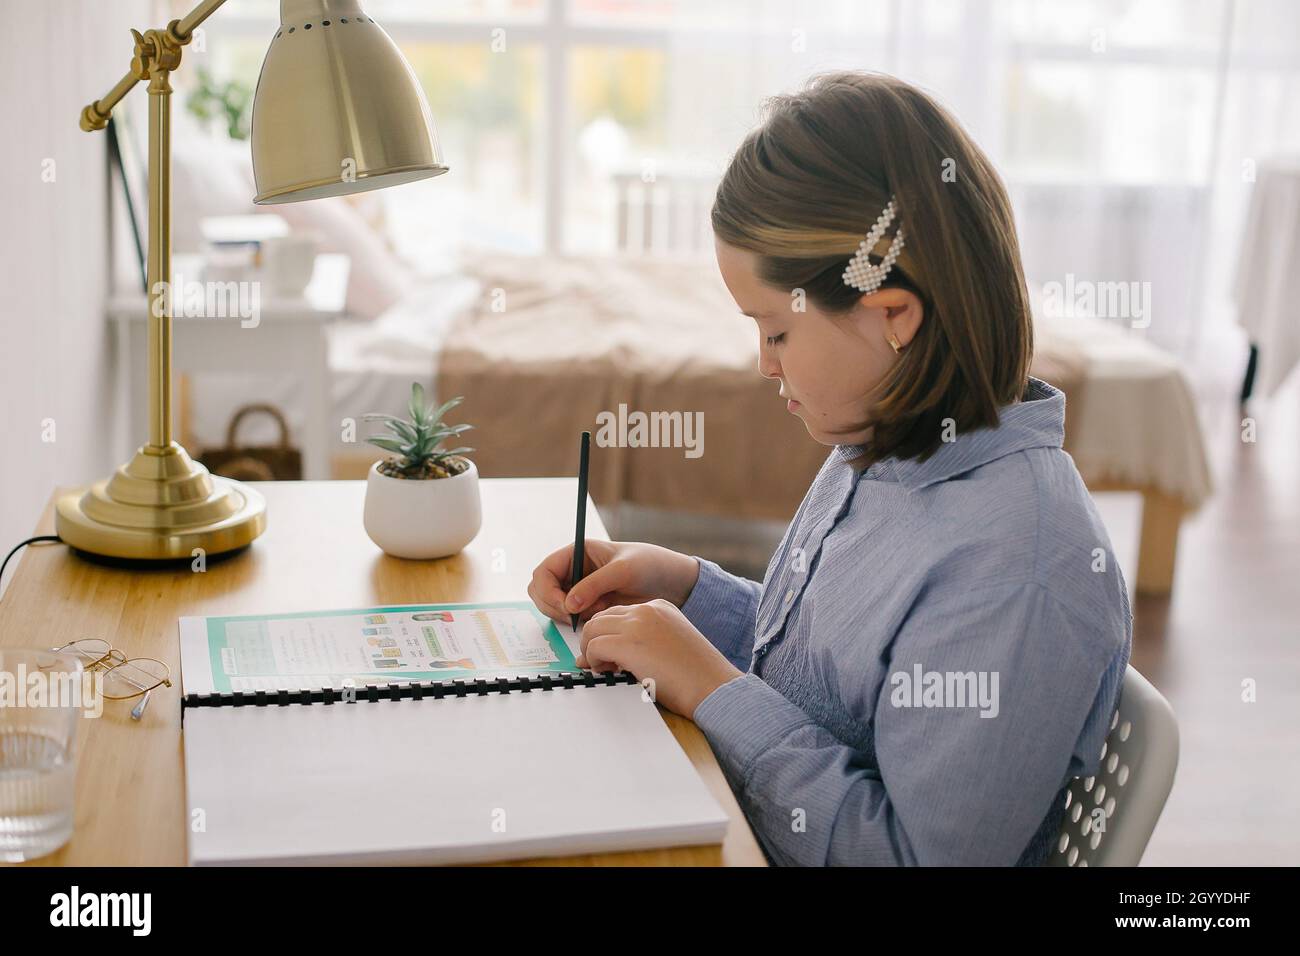 Young girl studying at home writing notes sitting at desk. Concept of home schooling, distance education concept Stock Photo